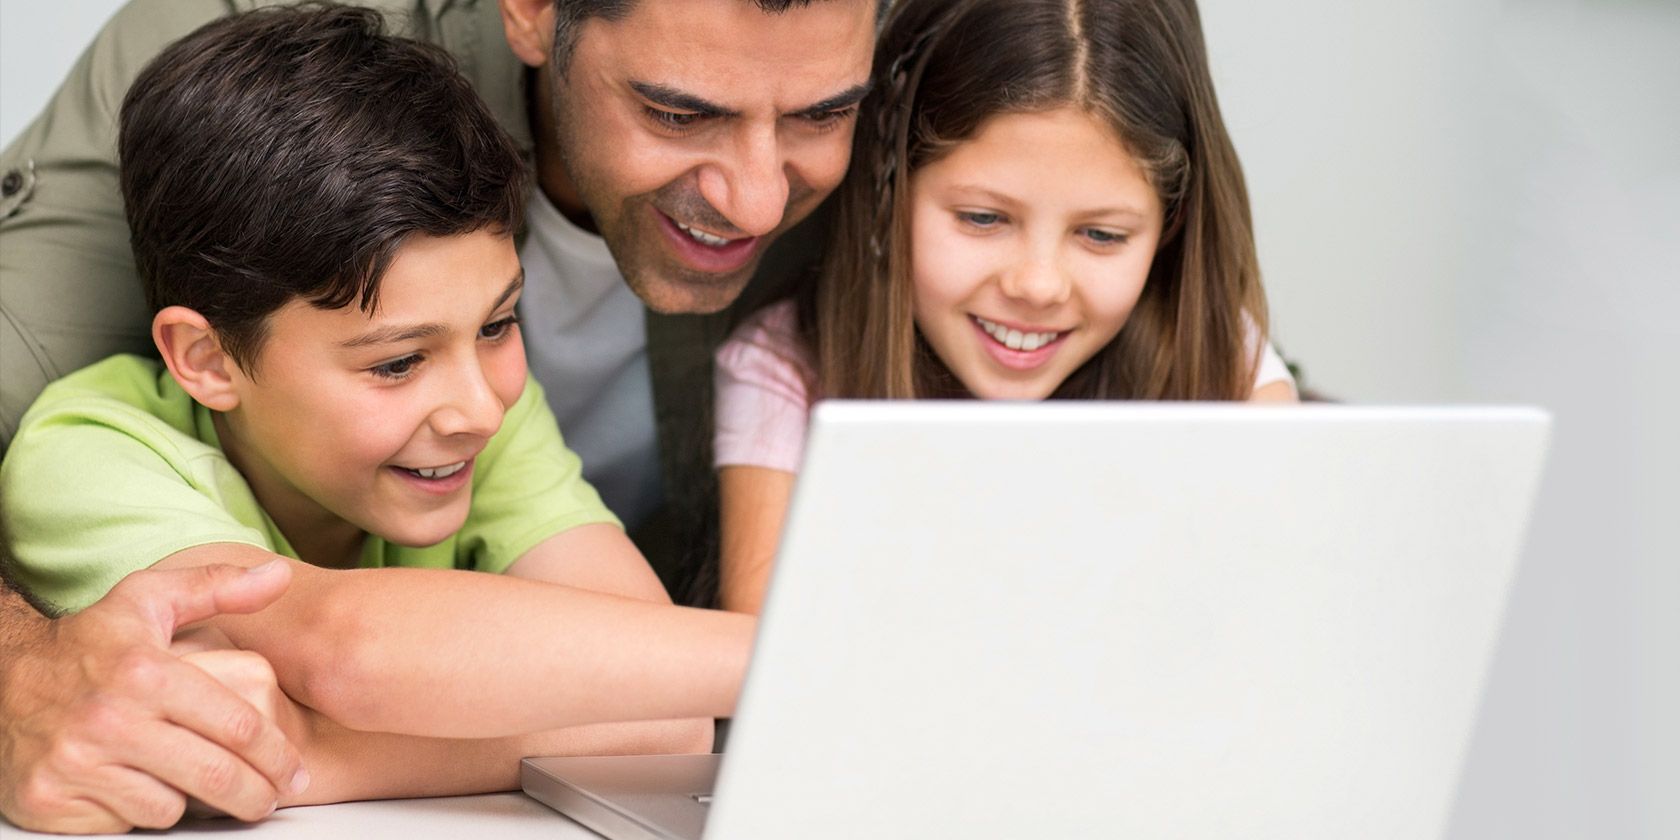 7 Family Safety Tools To Keep Your Kids Safe Online